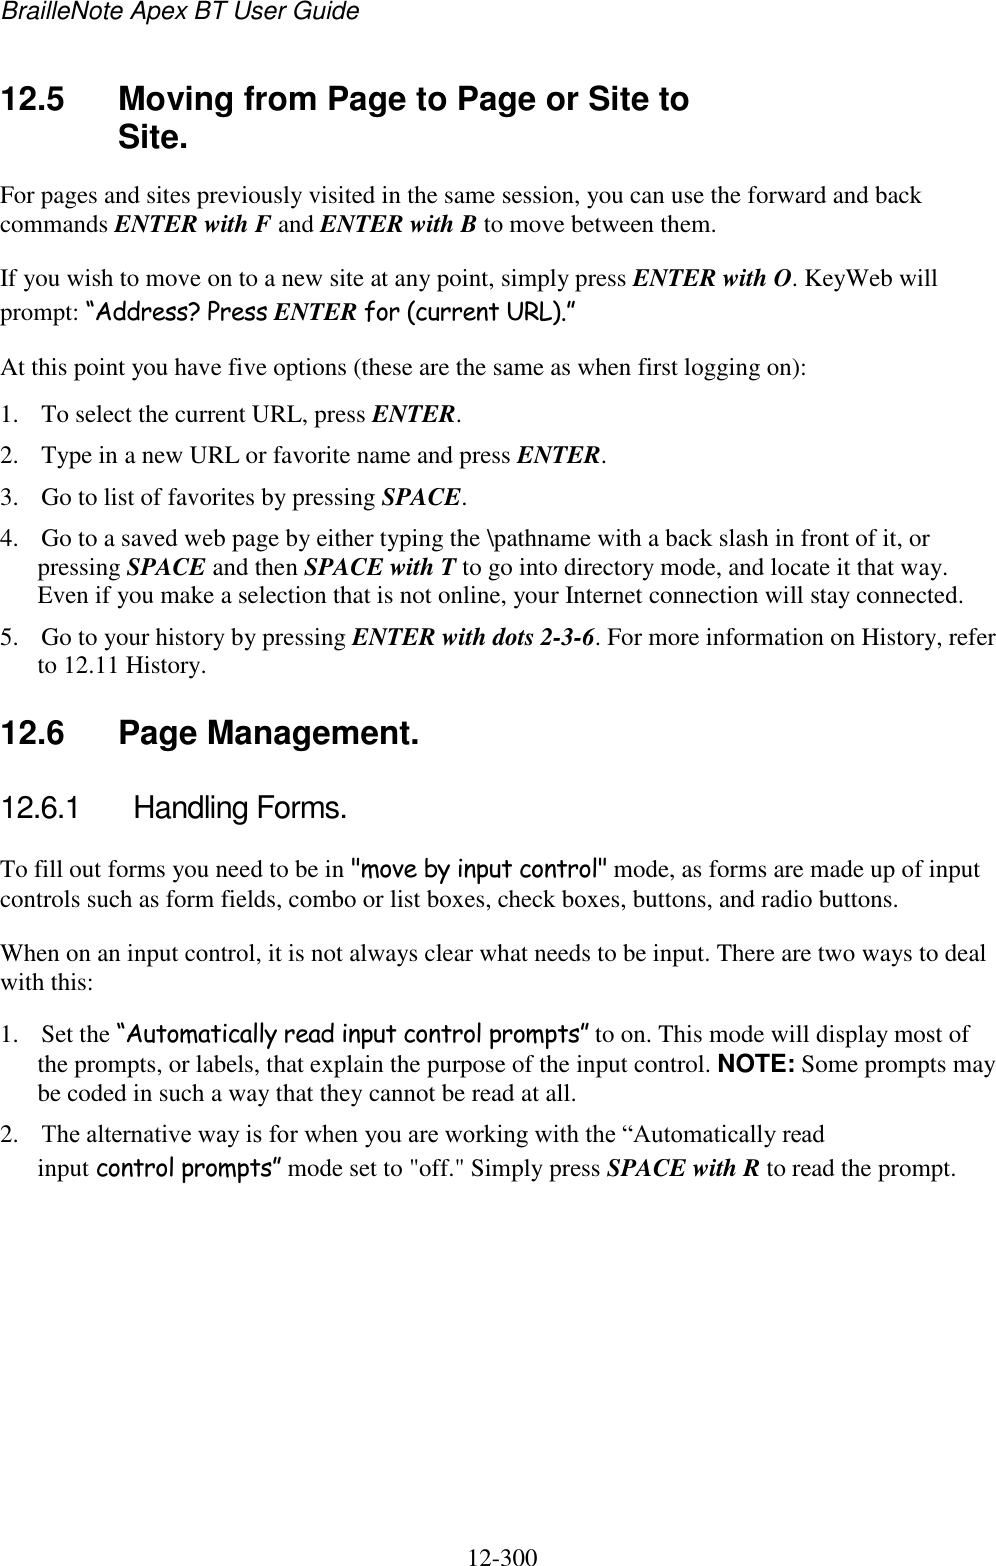 BrailleNote Apex BT User Guide   12-300   12.5  Moving from Page to Page or Site to Site. For pages and sites previously visited in the same session, you can use the forward and back commands ENTER with F and ENTER with B to move between them. If you wish to move on to a new site at any point, simply press ENTER with O. KeyWeb will prompt: “Address? Press ENTER for (current URL).” At this point you have five options (these are the same as when first logging on): 1. To select the current URL, press ENTER. 2. Type in a new URL or favorite name and press ENTER. 3. Go to list of favorites by pressing SPACE. 4. Go to a saved web page by either typing the \pathname with a back slash in front of it, or pressing SPACE and then SPACE with T to go into directory mode, and locate it that way. Even if you make a selection that is not online, your Internet connection will stay connected. 5. Go to your history by pressing ENTER with dots 2-3-6. For more information on History, refer to 12.11 History.  12.6  Page Management. 12.6.1  Handling Forms. To fill out forms you need to be in &quot;move by input control&quot; mode, as forms are made up of input controls such as form fields, combo or list boxes, check boxes, buttons, and radio buttons. When on an input control, it is not always clear what needs to be input. There are two ways to deal with this: 1. Set the “Automatically read input control prompts” to on. This mode will display most of the prompts, or labels, that explain the purpose of the input control. NOTE: Some prompts may be coded in such a way that they cannot be read at all. 2. The alternative way is for when you are working with the “Automatically read input control prompts” mode set to &quot;off.&quot; Simply press SPACE with R to read the prompt.  